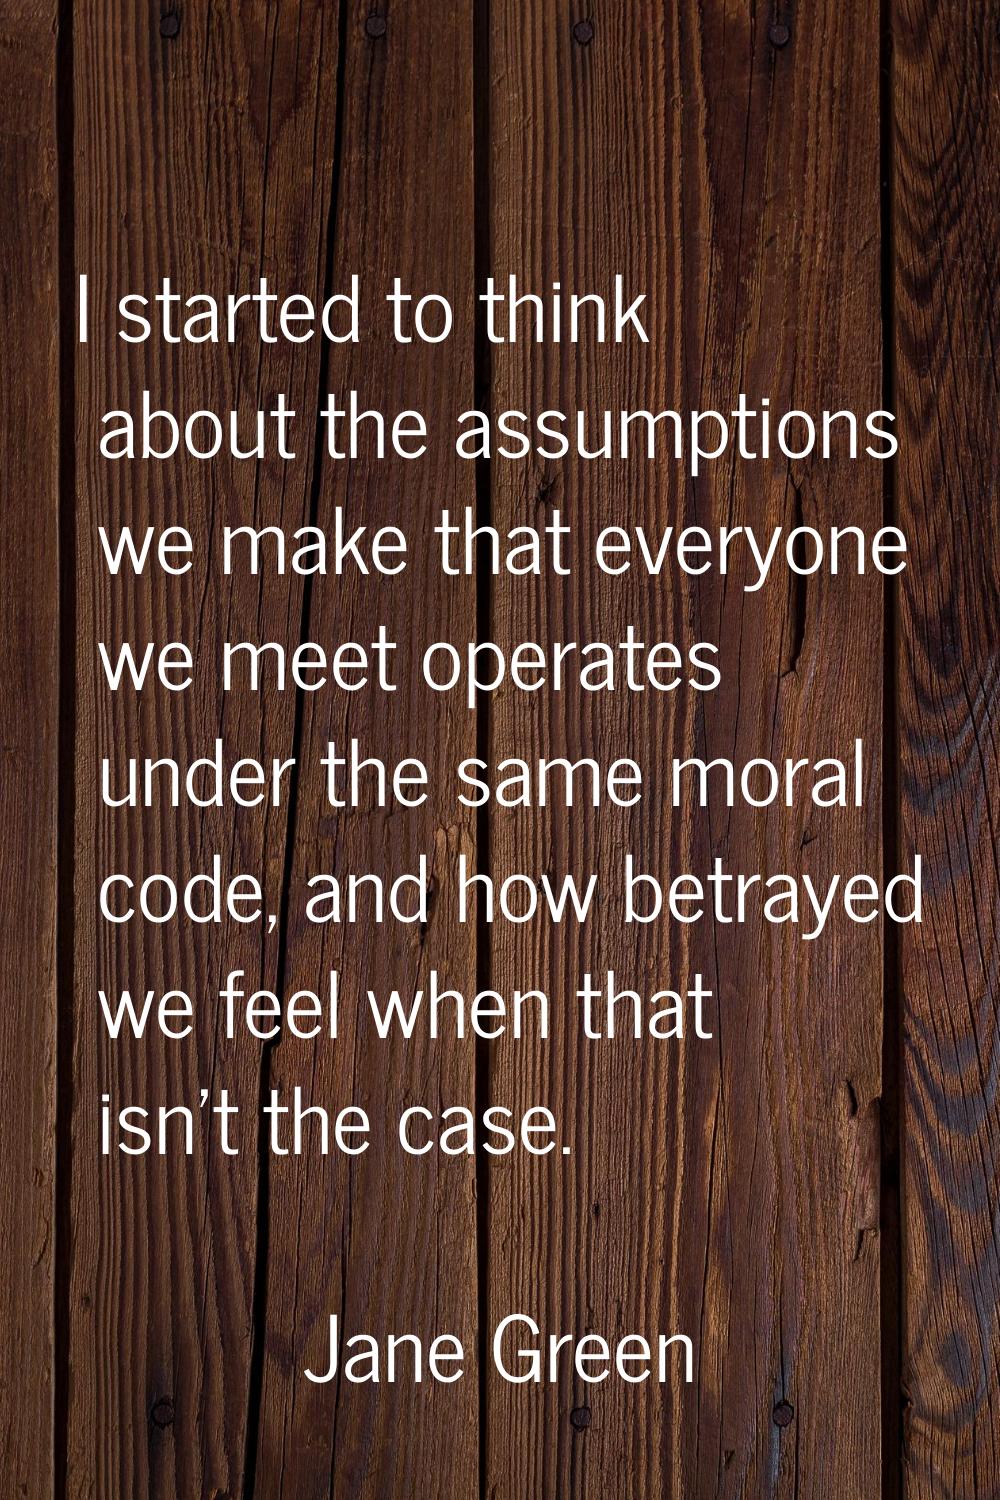 I started to think about the assumptions we make that everyone we meet operates under the same mora